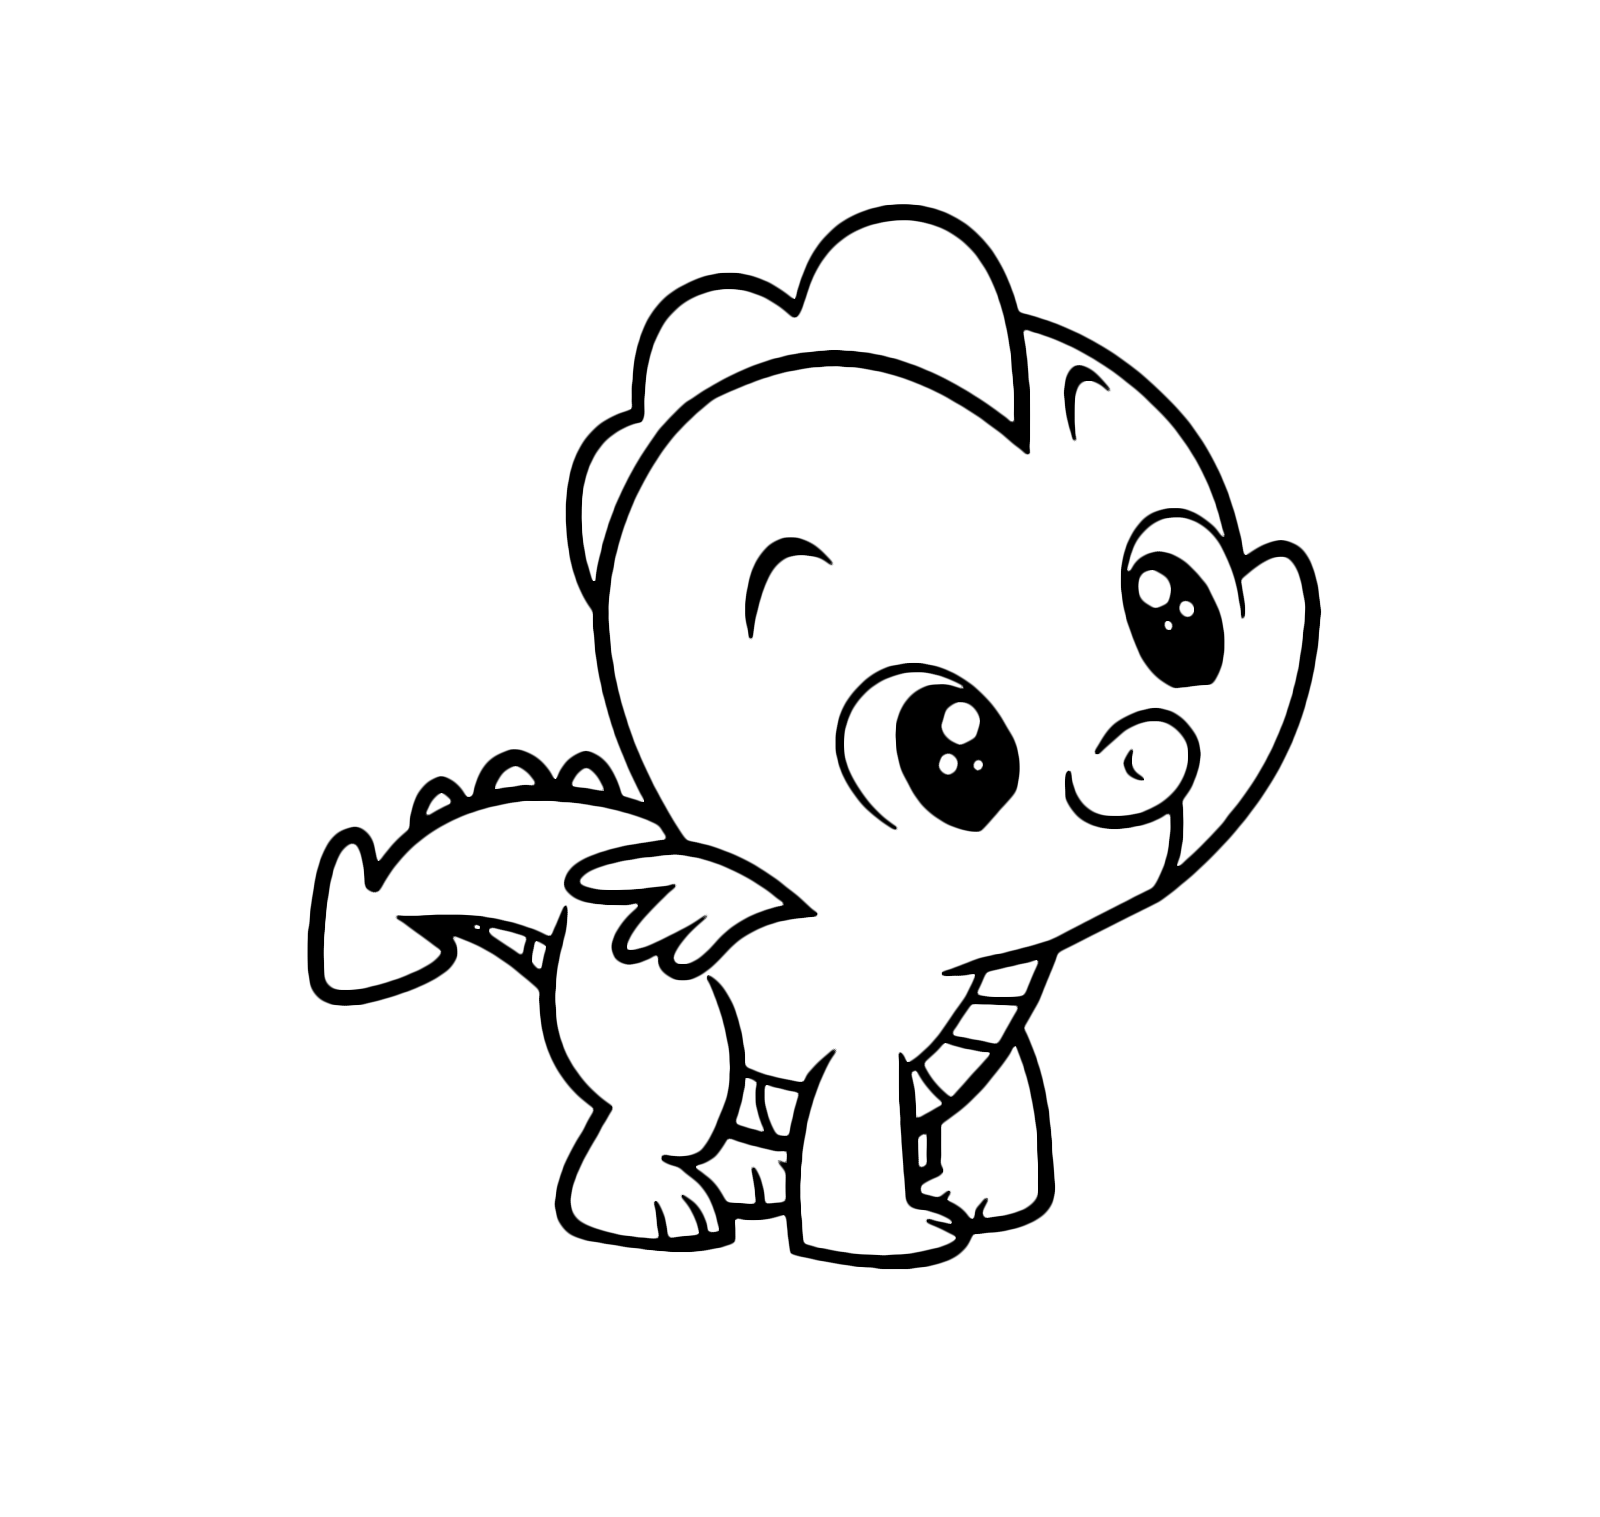 coloring pages : Baby Dragon Spike Coloring Pagey Little Pony Pages For  Kids Christmas Newborn Rainbow Dash Games Online To Play 64 My Little Pony  Baby Coloring Pages Picture Ideas ~ mommaonamissioninc